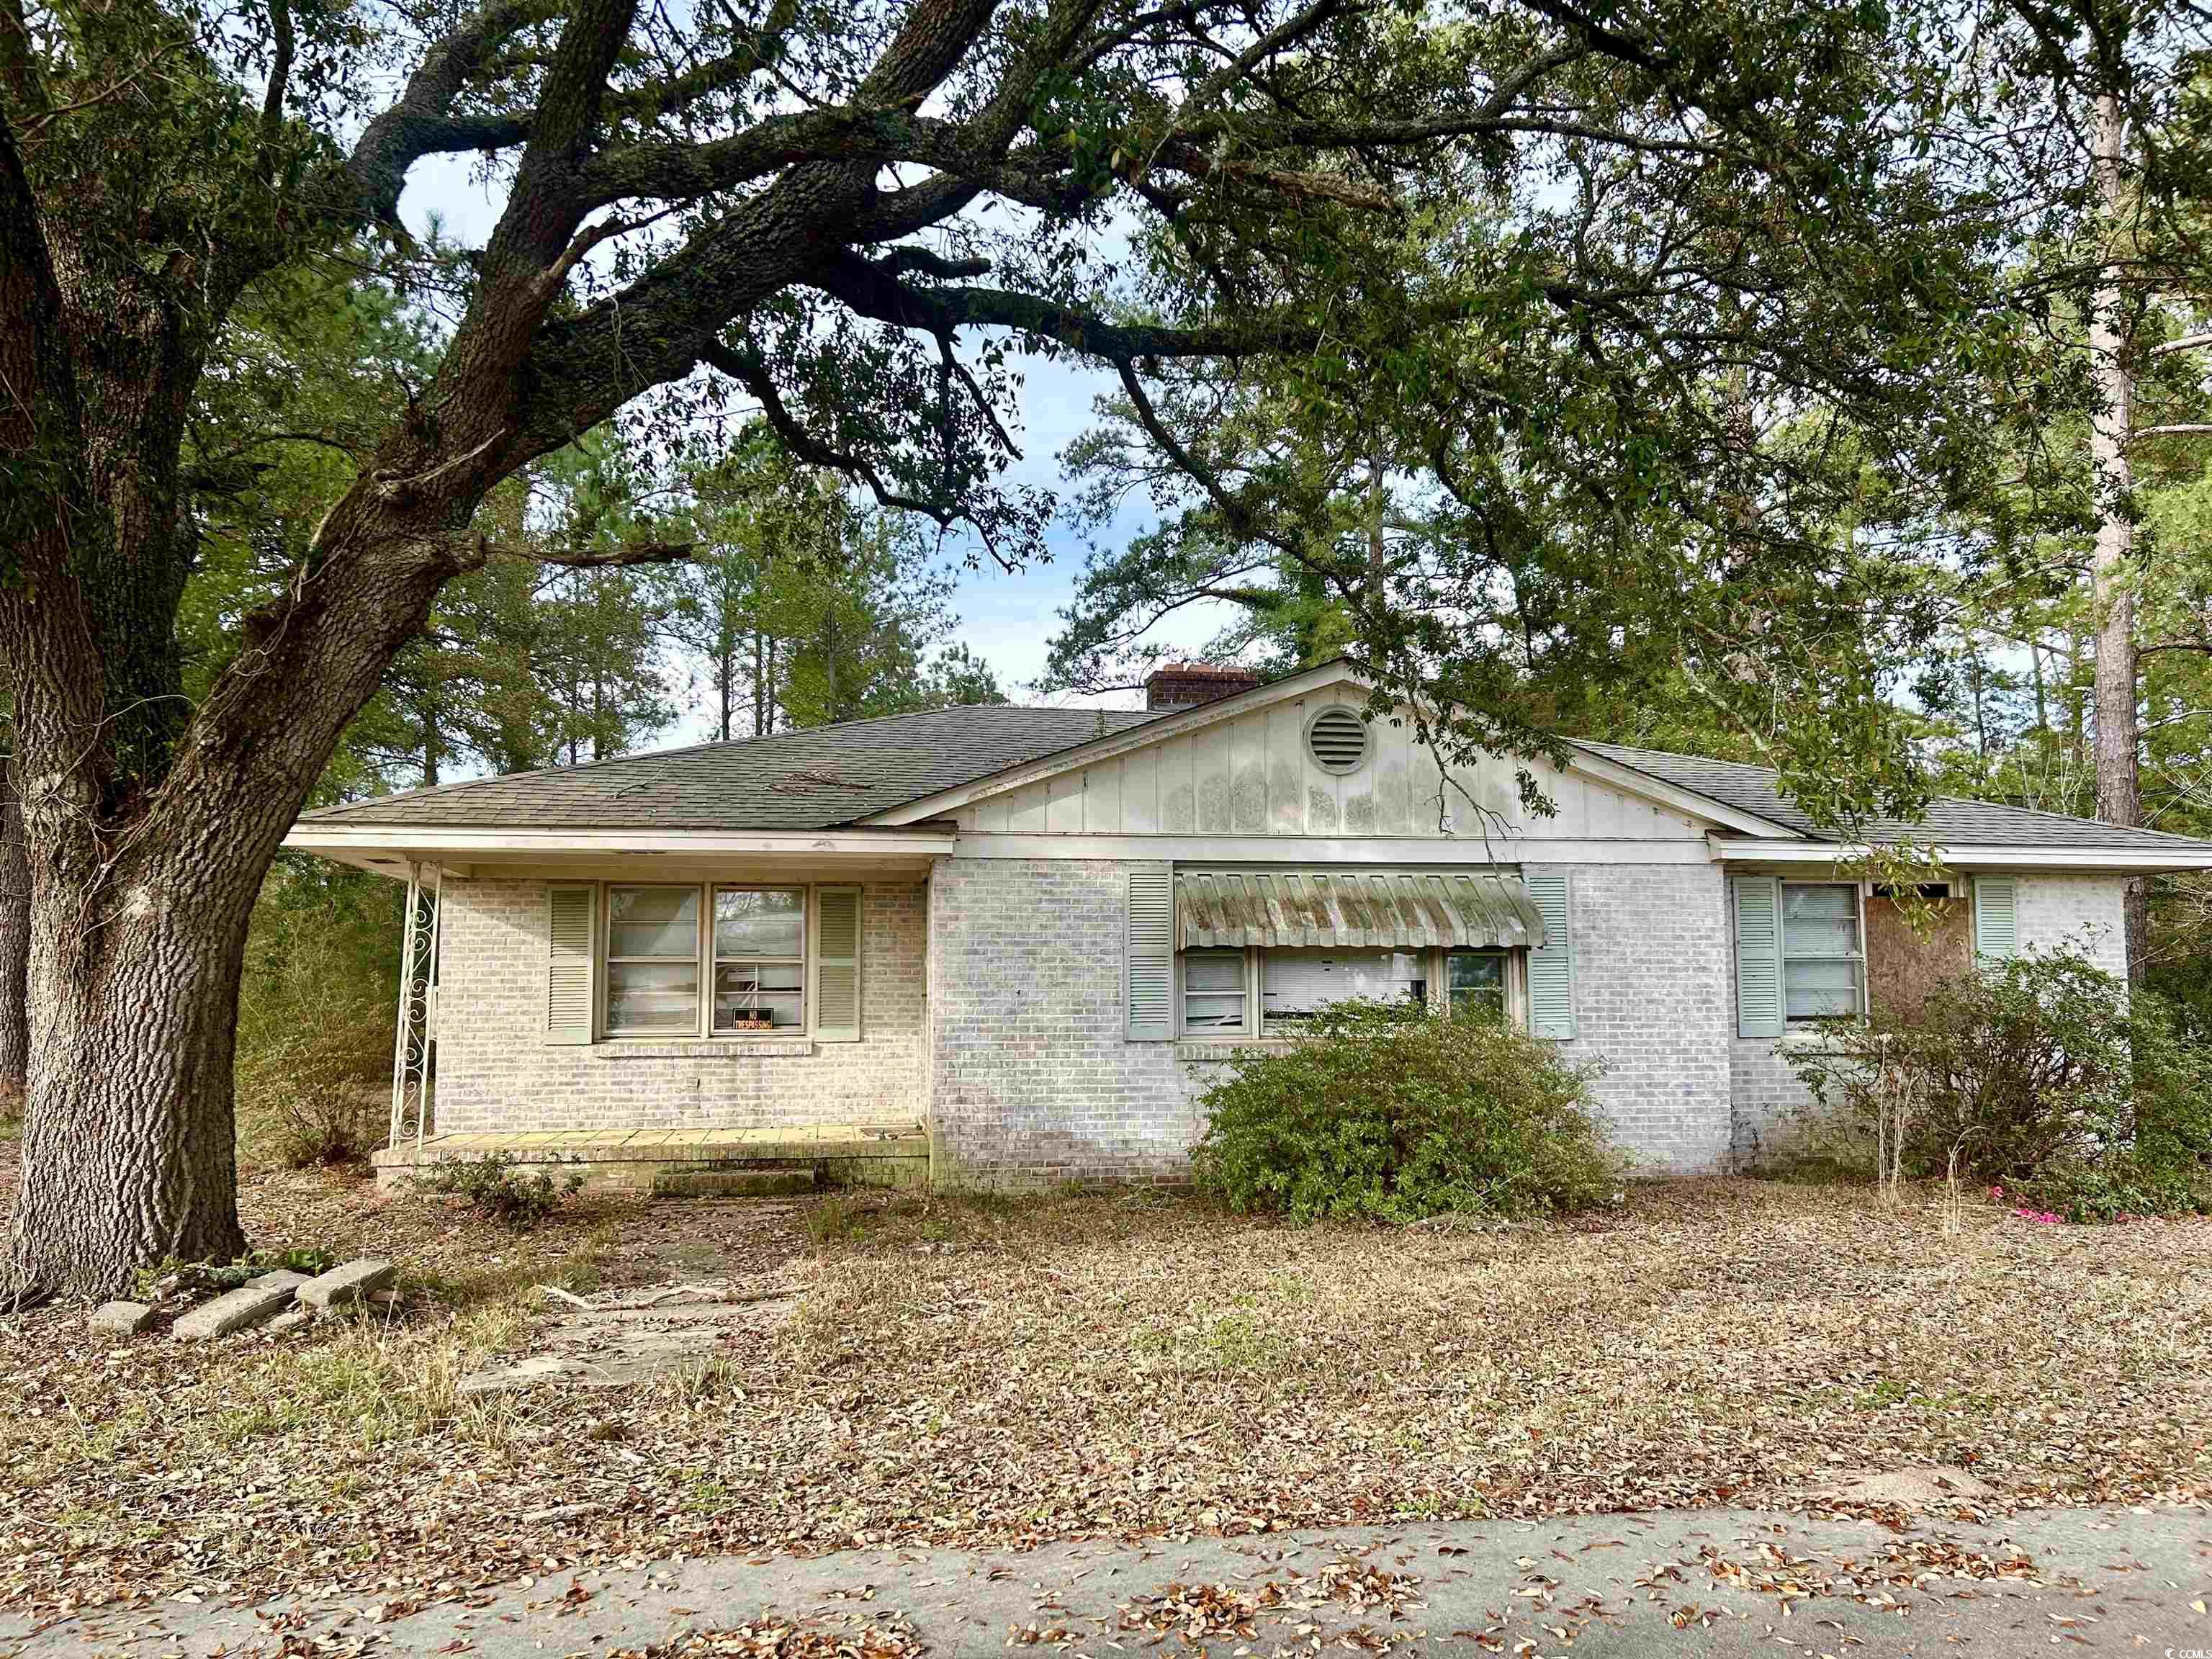 this is a great investment opportunity with almost an acre of land and a little over 1400 heated square feet of space.   listing agent is related to homeowner.  home is being sold as-is.